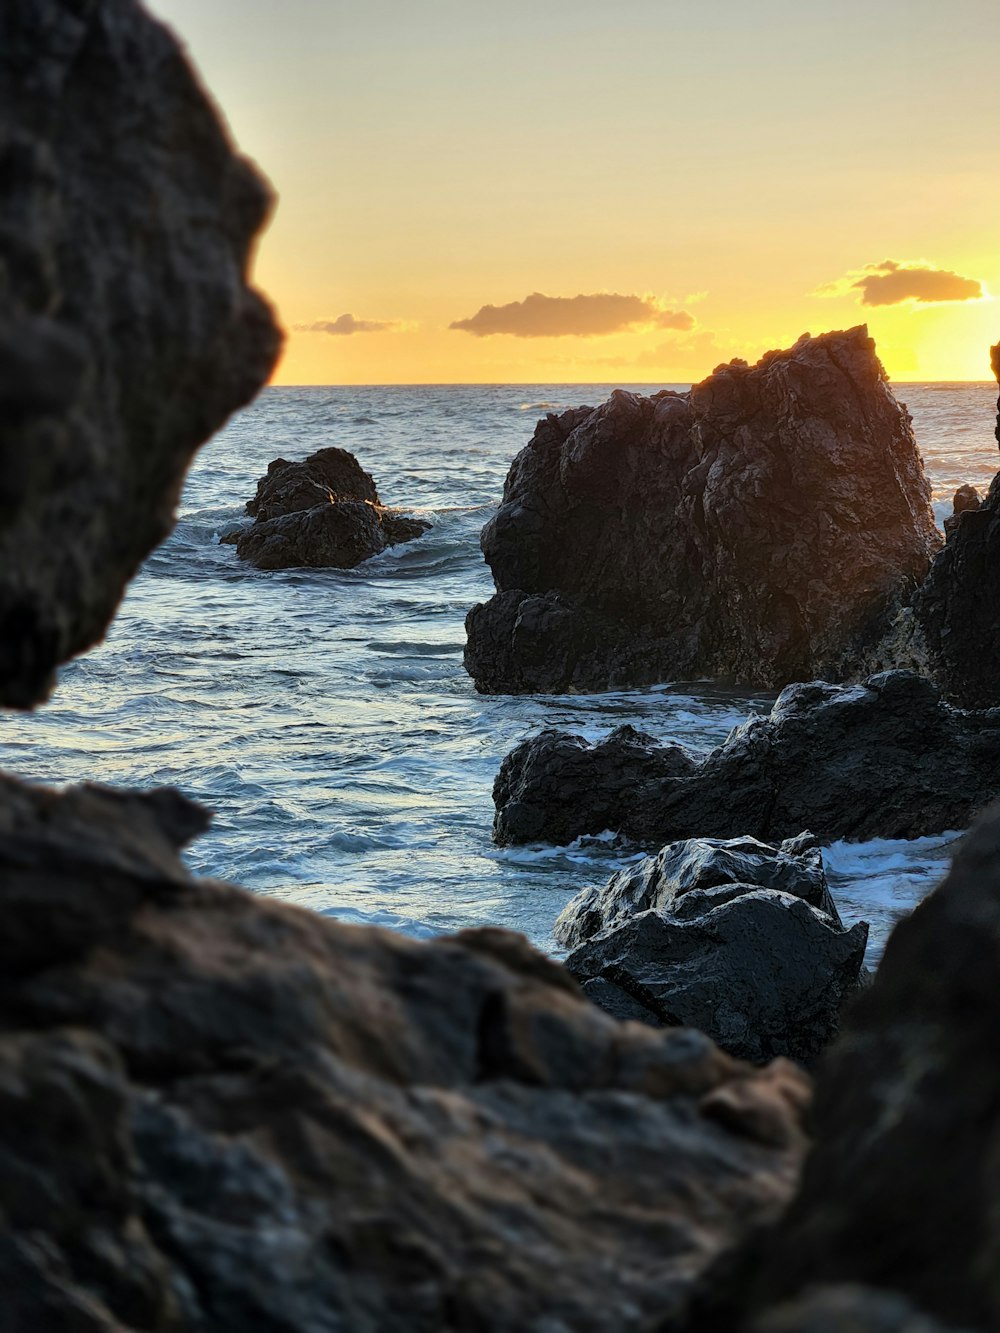 the sun is setting over the ocean and rocks